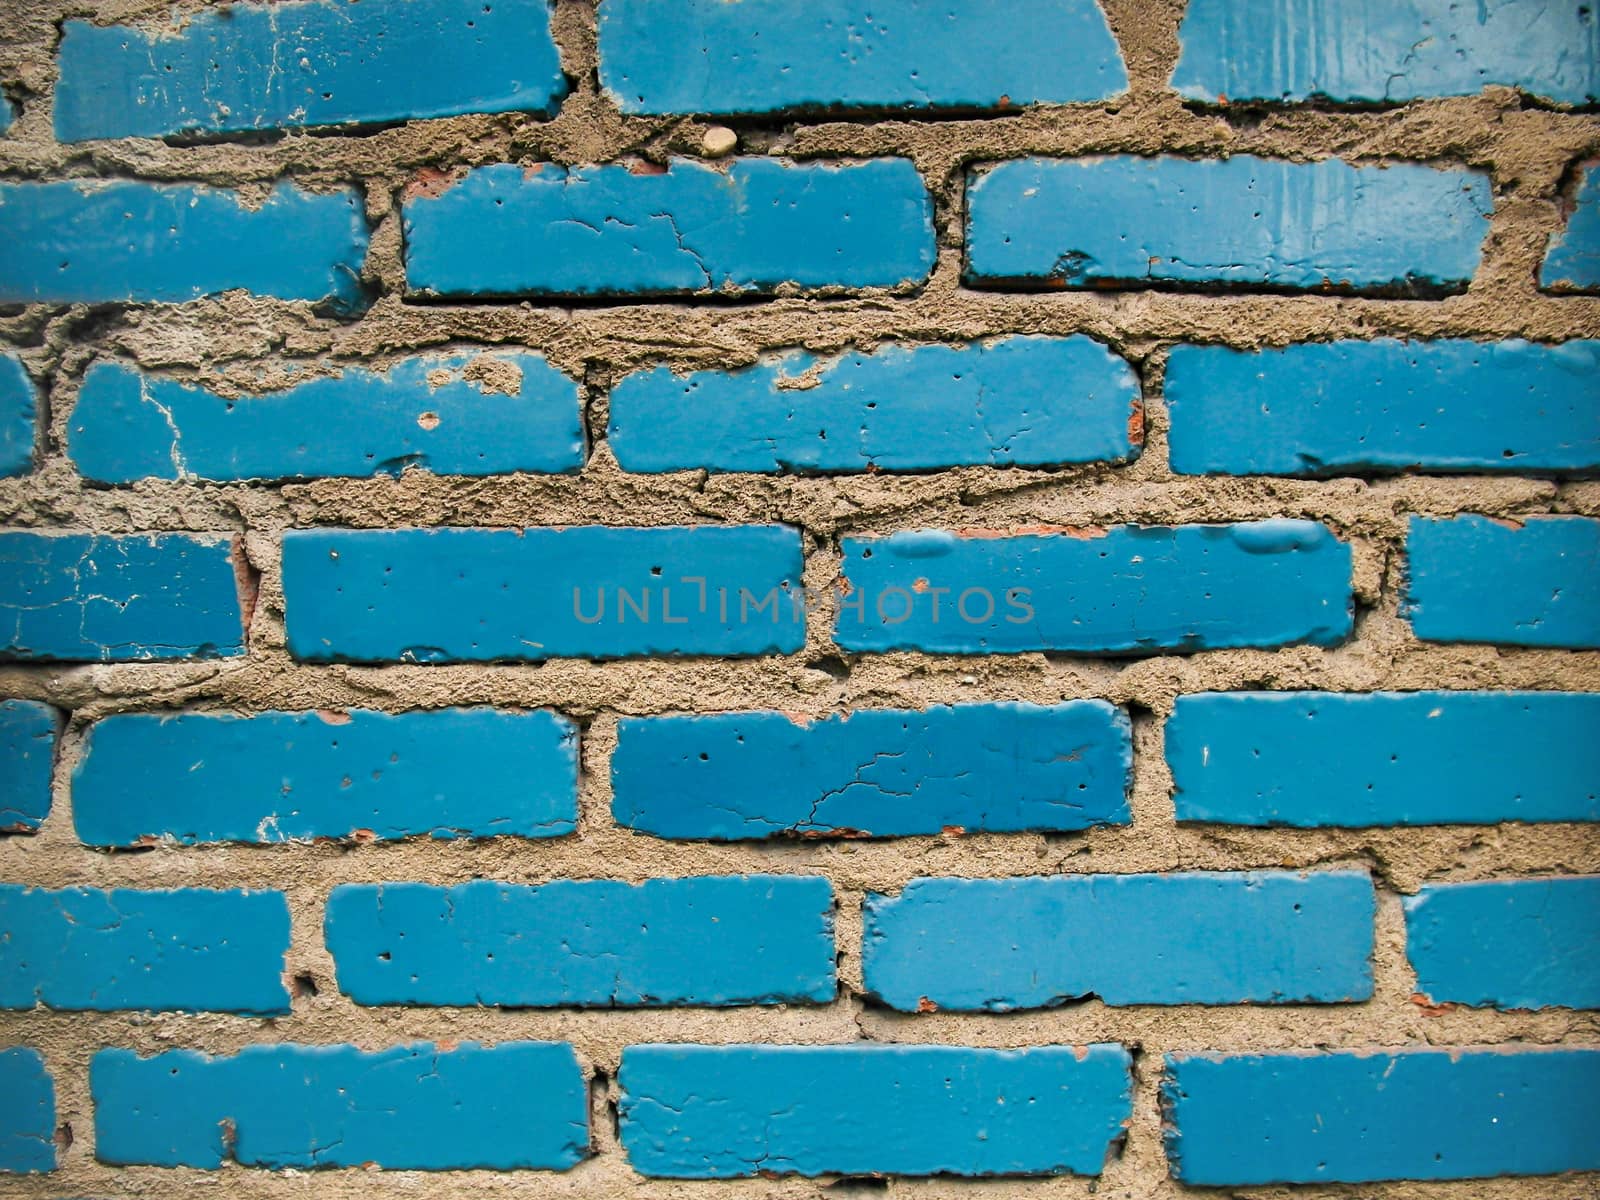 The brick wall painted in blue.A blue brick wall.